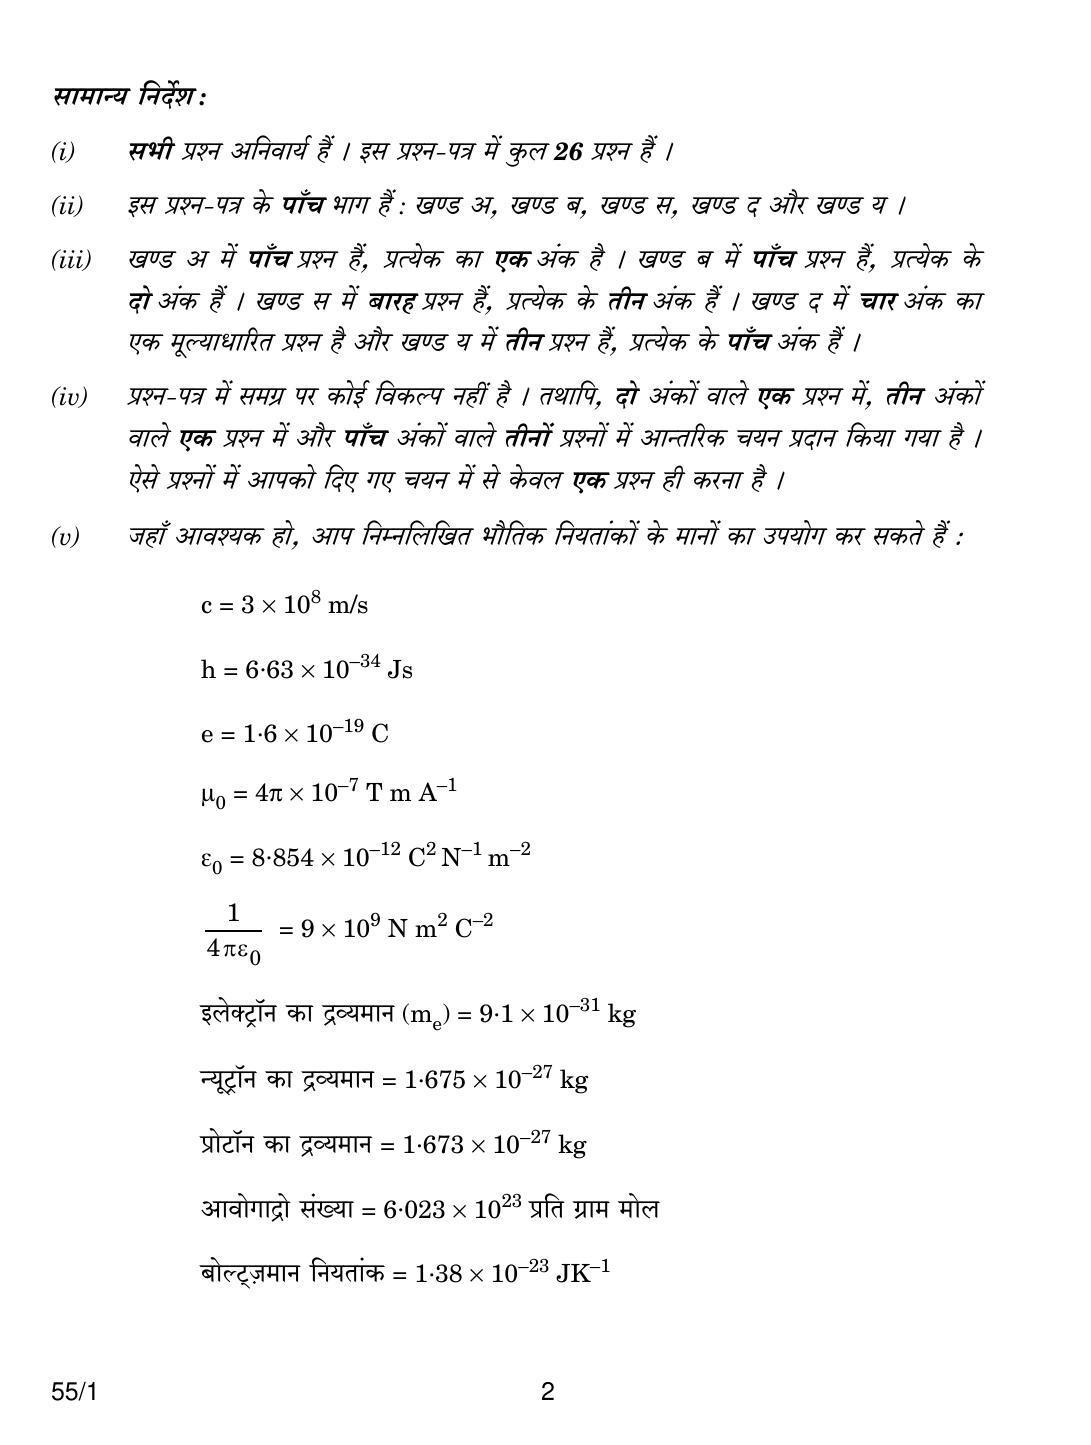 CBSE Class 12 55-1 PHYSICS 2018 Question Paper - Page 2